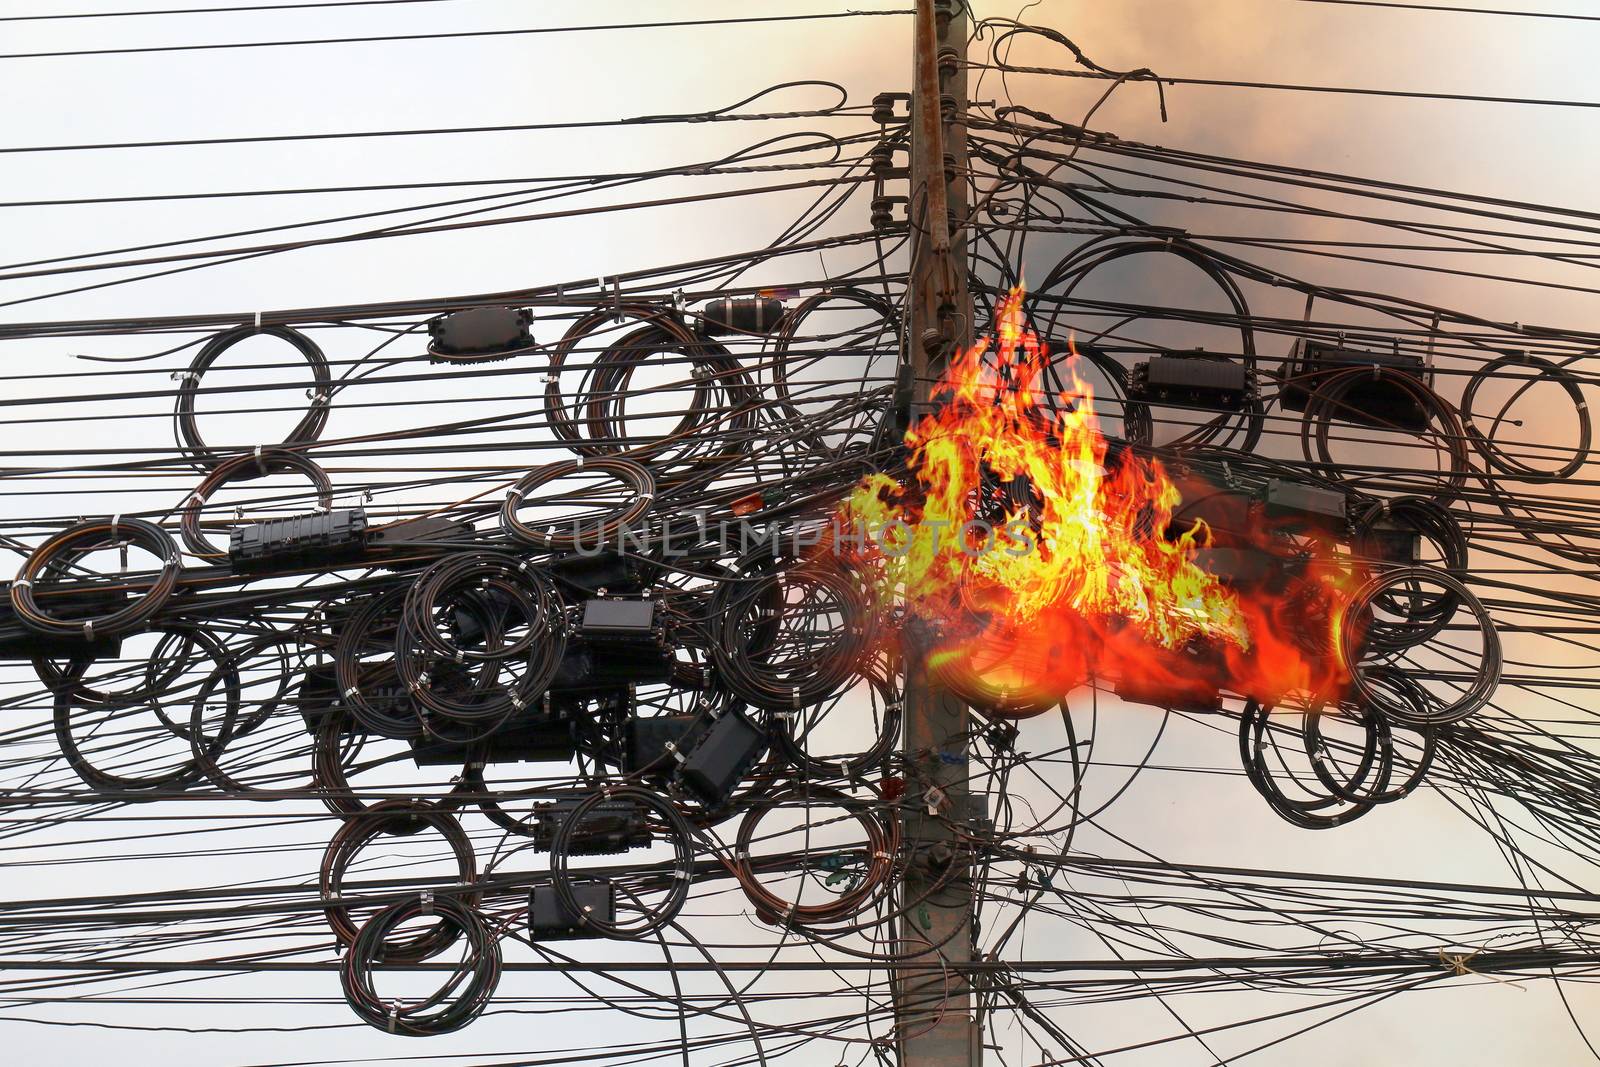 Fire is burning at High Voltage Cables power, Danger wire tangle cord electrical energy